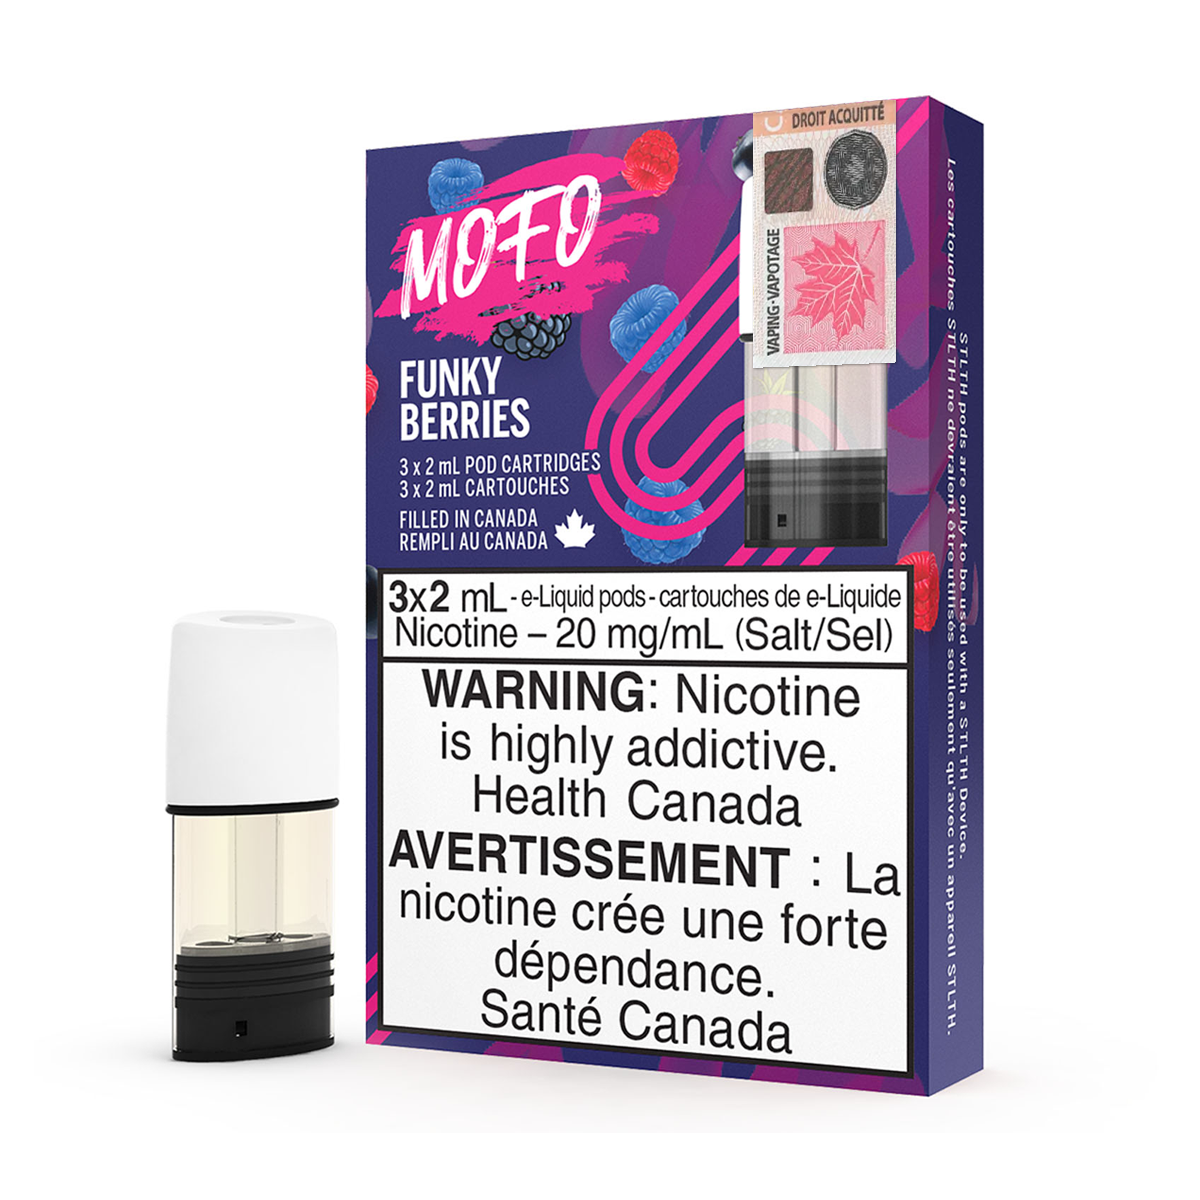 Mofo STLTH Pods - Funky Berries (3x2mL) (6603494948919)